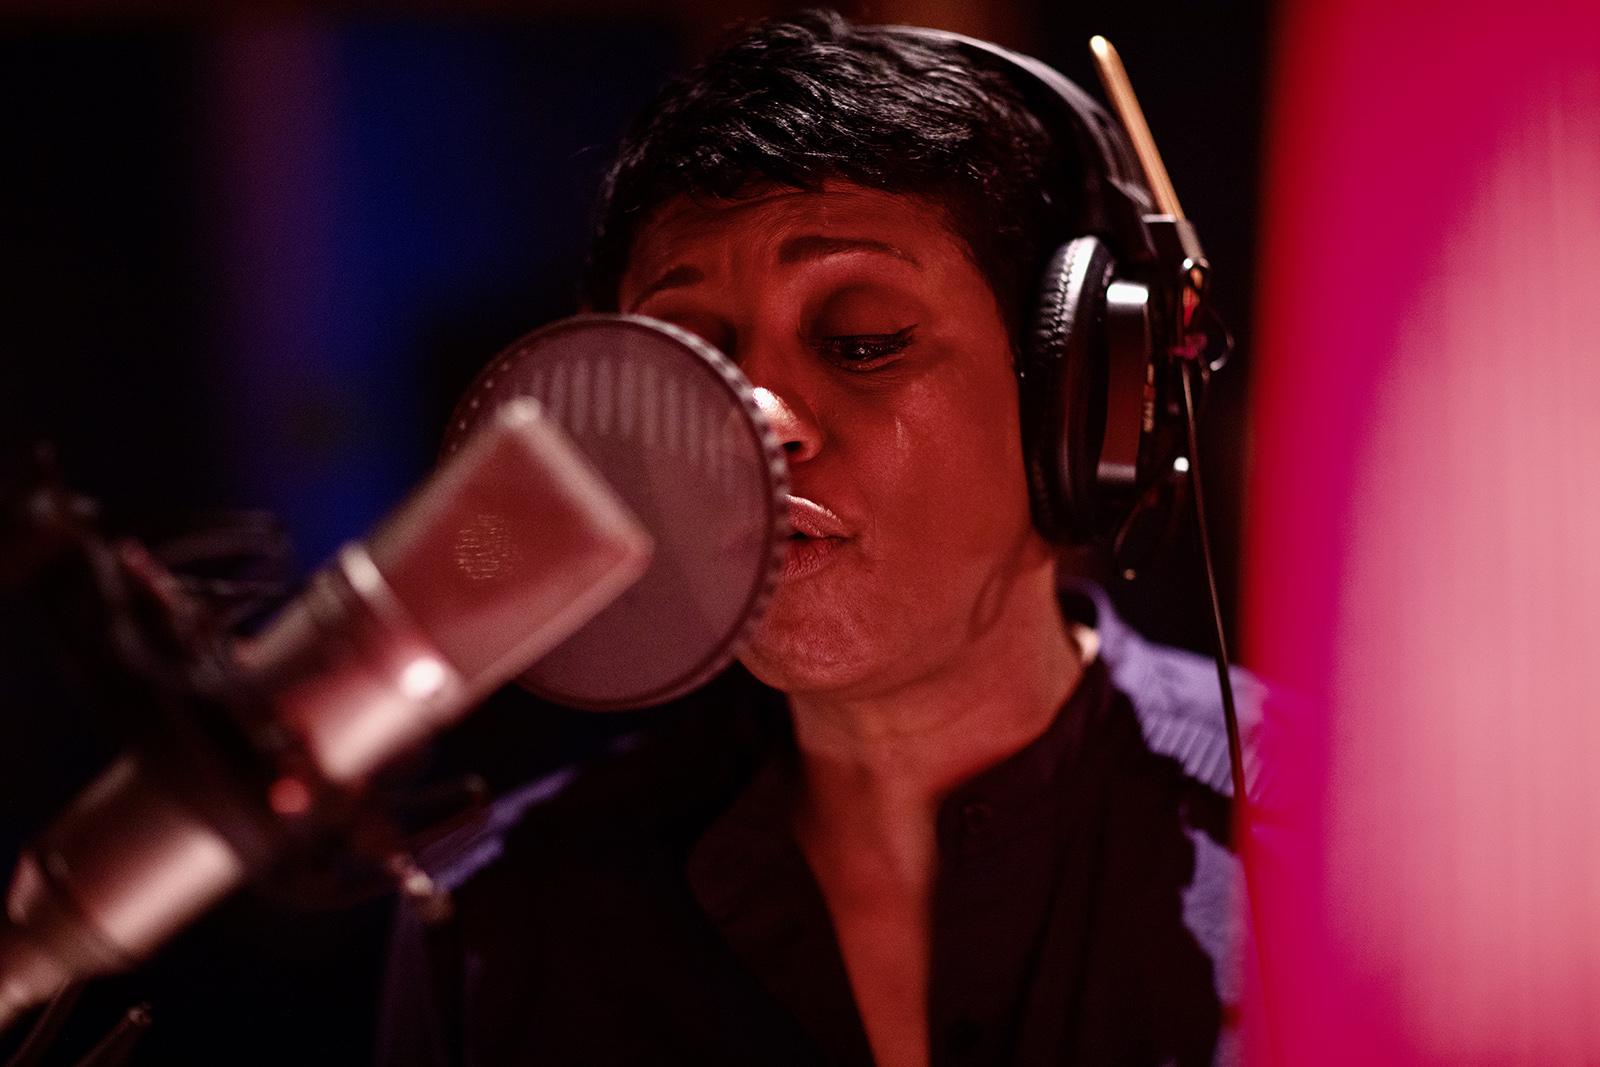 Marva Hicks sings the part of Mother Mary on the album “Jesus Christ Superstar: Highlights From the All-Female Studio Cast Recording." Photo by Kat Hennessey